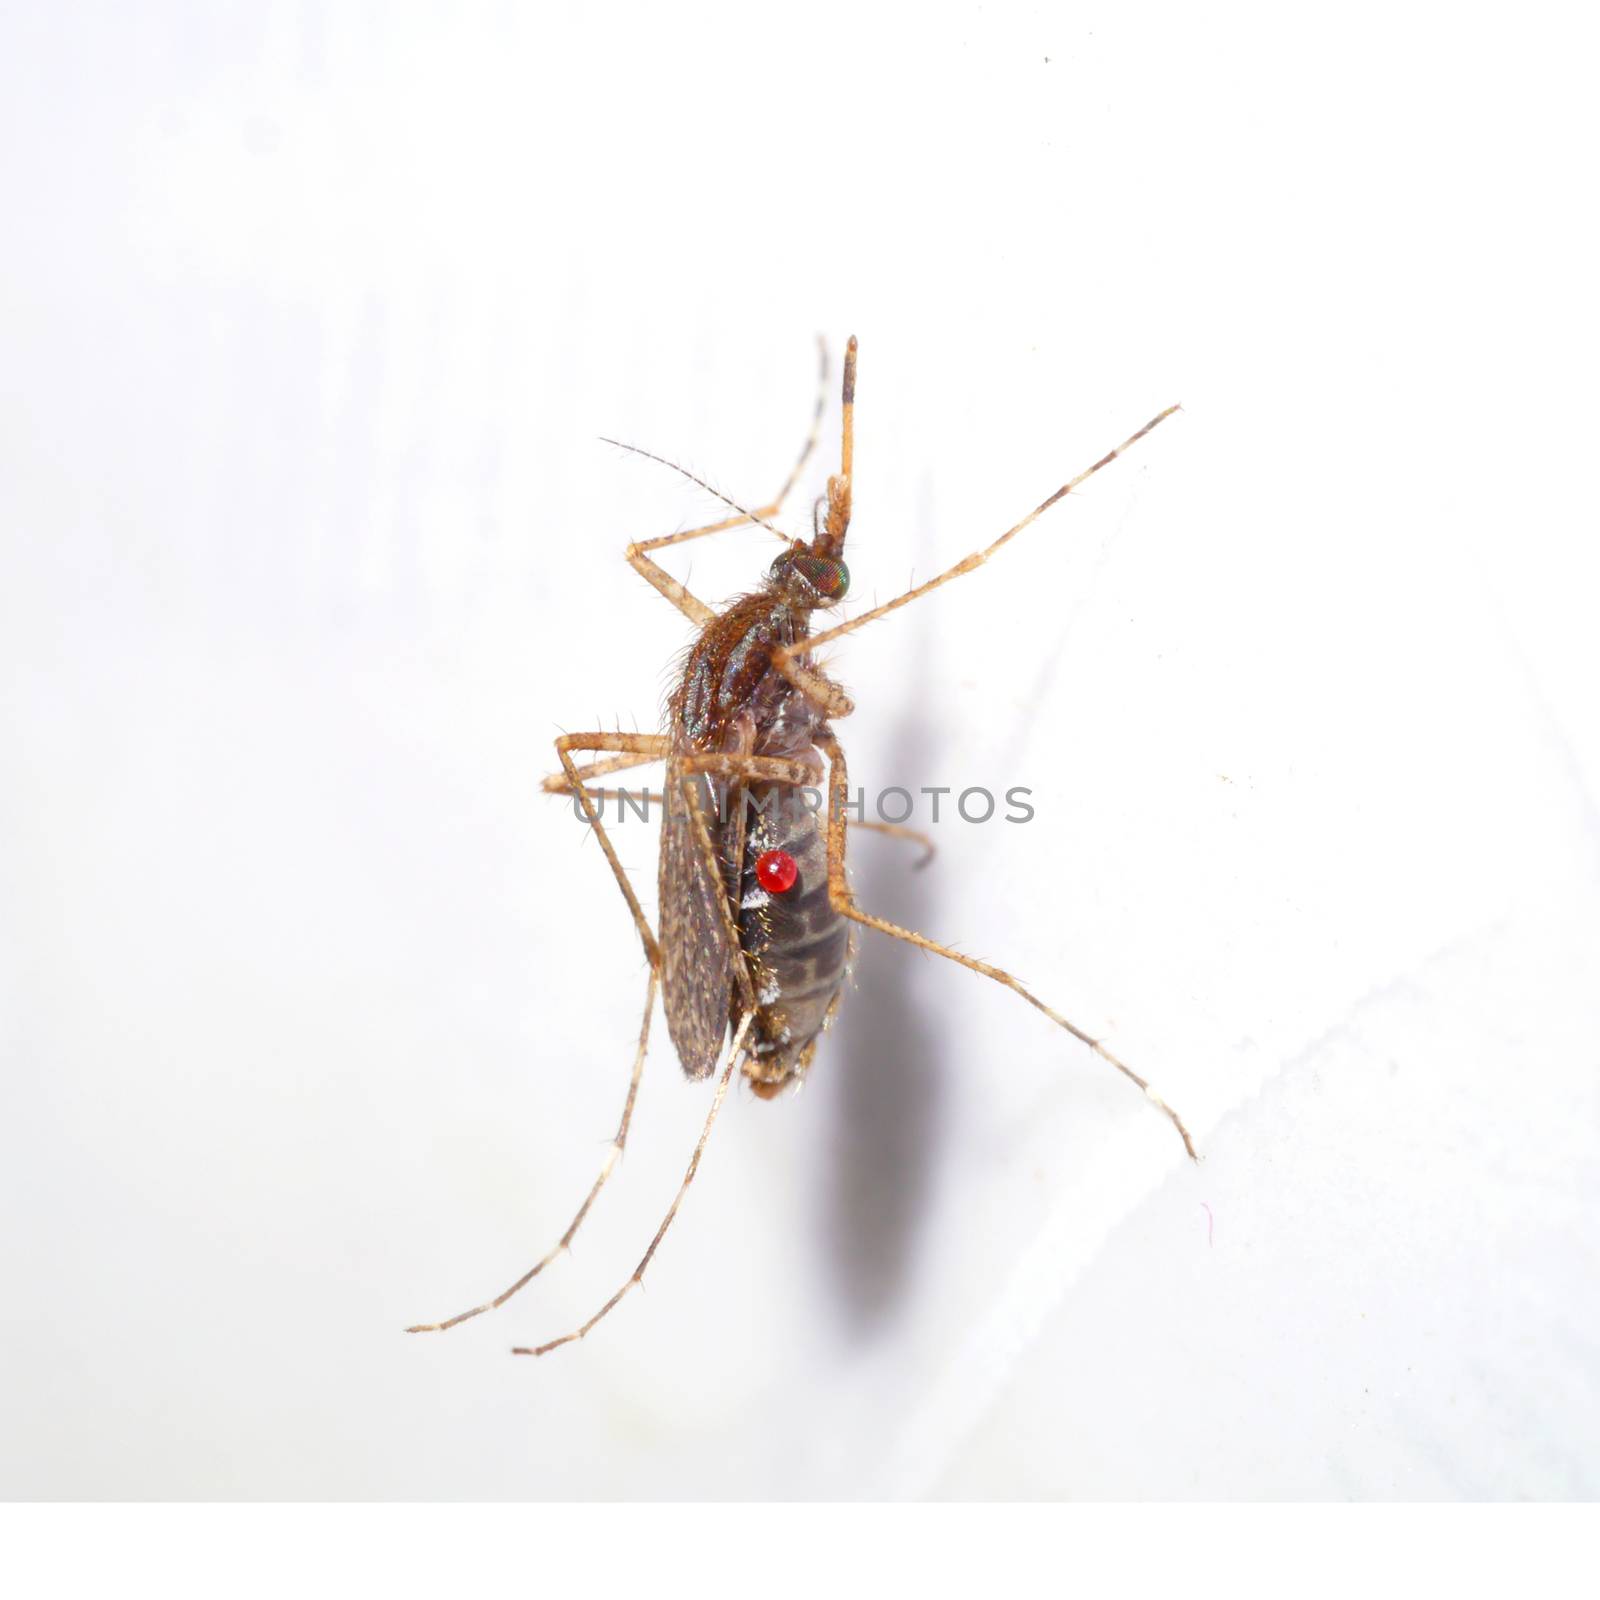 Mosquitoes spawn isolated on white background.